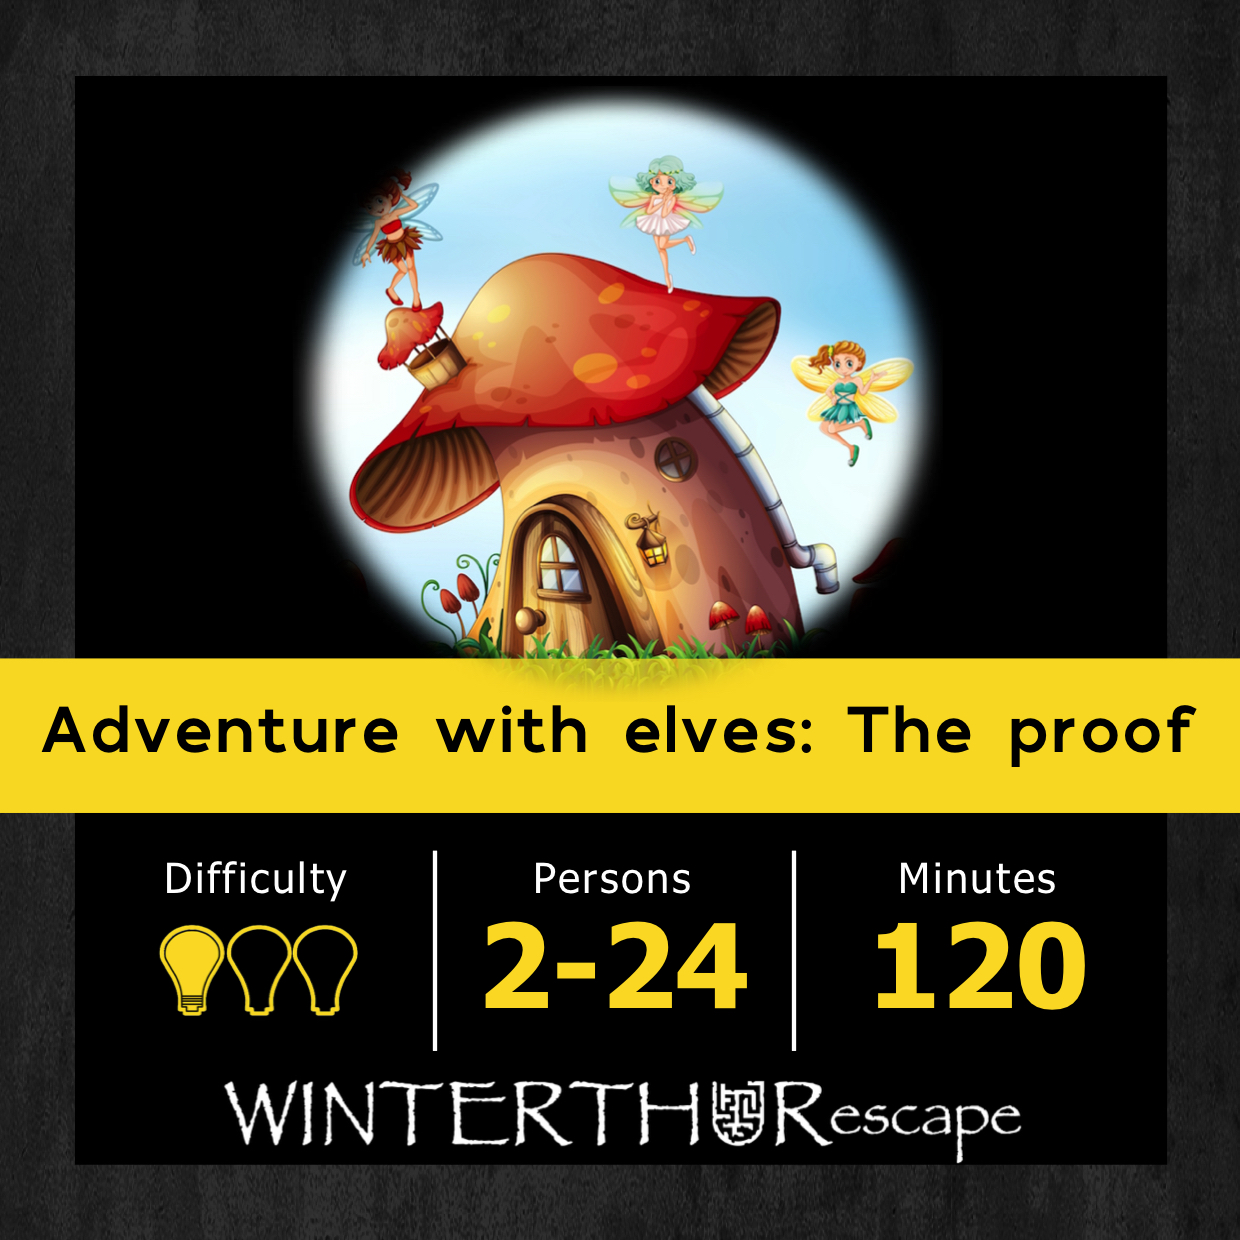 Adventure with elves: the proof Winterthuralbisrieden, foxtrail children Winterthuralbisrieden, foxtrail familie Winterthuralbisrieden, escape game children Winterthuralbisrieden, outdoor escape game children Winterthuralbisrieden, outdoor escape room children Winterthuralbisrieden, schnitzeljagd children Winterthuralbisrieden, schatzsuche children Winterthuralbisrieden, urbanmission children Winterthuralbisrieden, city game children Winterthuralbisrieden, treasure hunt children Winterthuralbisrieden, scavenger game children Winterthuralbisrieden, outdoor spiel children Winterthuralbisrieden, outdoor game children Winterthuralbisrieden, escape mission children Winterthuralbisrieden, outdoor escape mission children Winterthuralbisrieden, escape game familie Winterthuralbisrieden, outdoor escape game familie Winterthuralbisrieden, outdoor escape room familie Winterthuralbisrieden, schnitzeljagd familie Winterthuralbisrieden, schatzsuche familie Winterthuralbisrieden, urbanmission familie Winterthuralbisrieden, city game familie Winterthuralbisrieden, treasure hunt familie Winterthuralbisrieden, scavenger game familie Winterthuralbisrieden, outdoor spiel familie Winterthuralbisrieden, outdoor game familie Winterthuralbisrieden, escape mission familie Winterthuralbisrieden, outdoor escape mission familie Winterthuralbisrieden<br />
